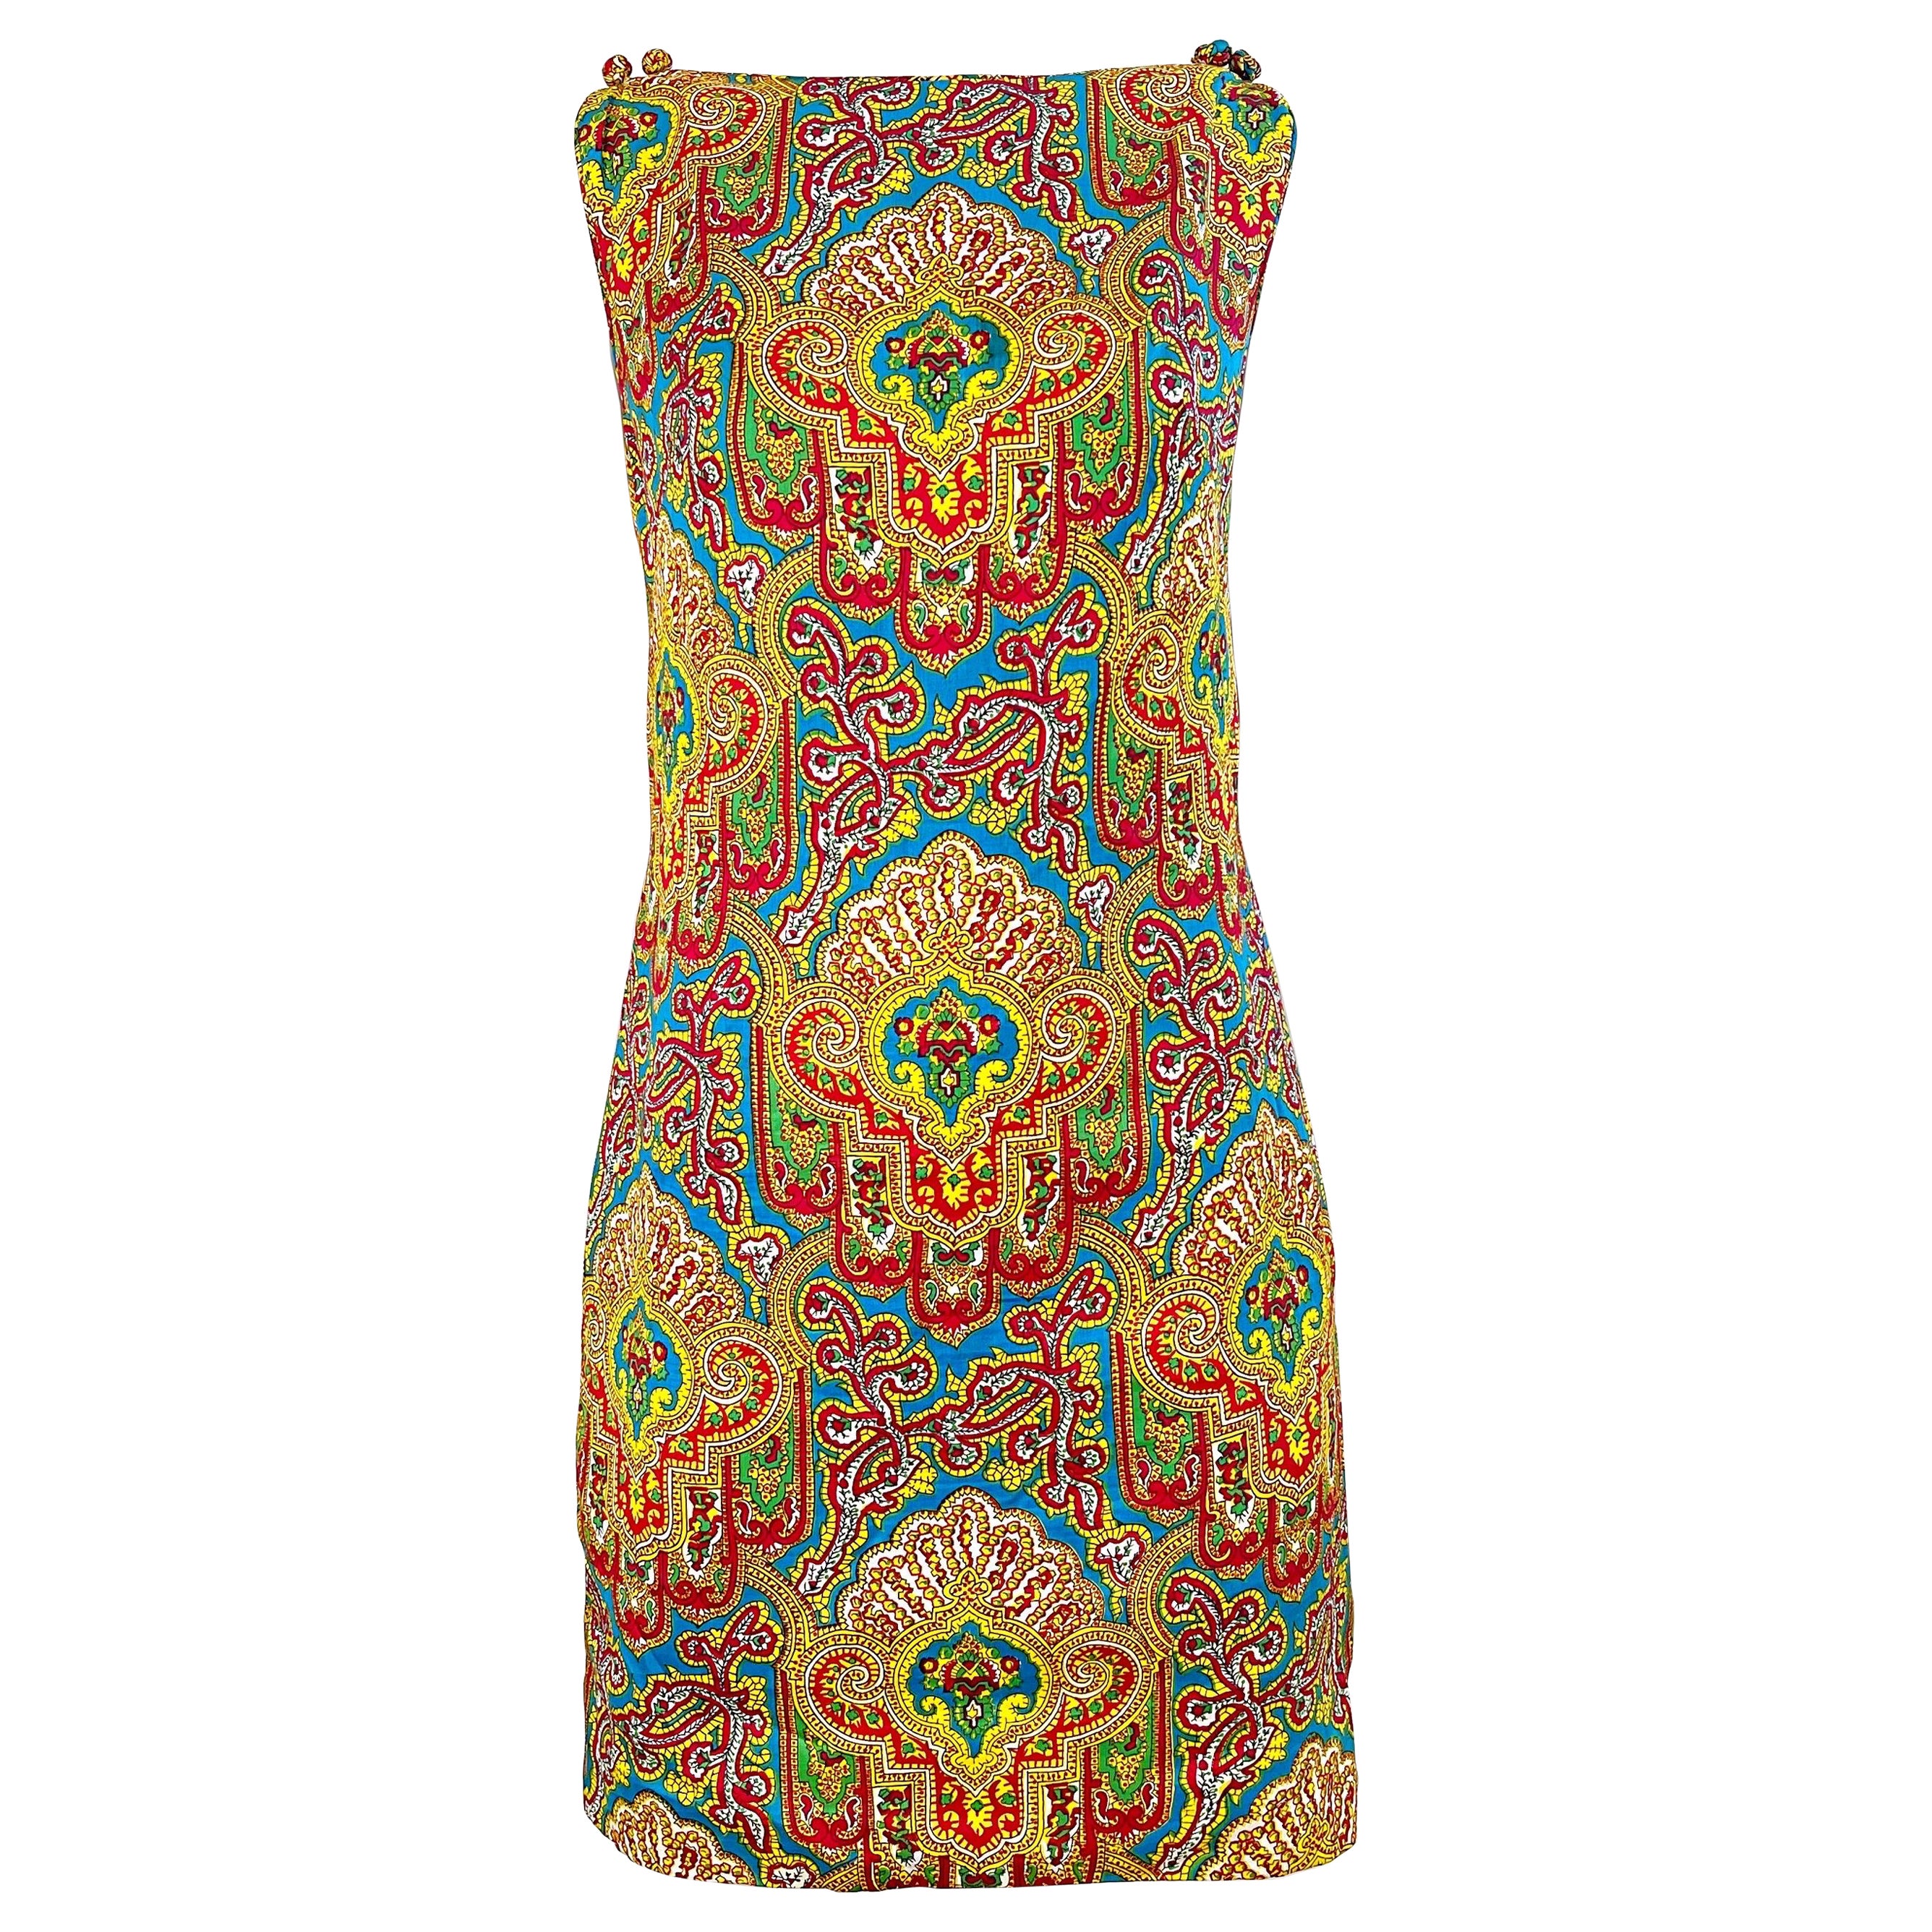 1960s Dynasty Paisley Bright Colorful Silk Vintage 60s Sleeveless Shift Dress For Sale